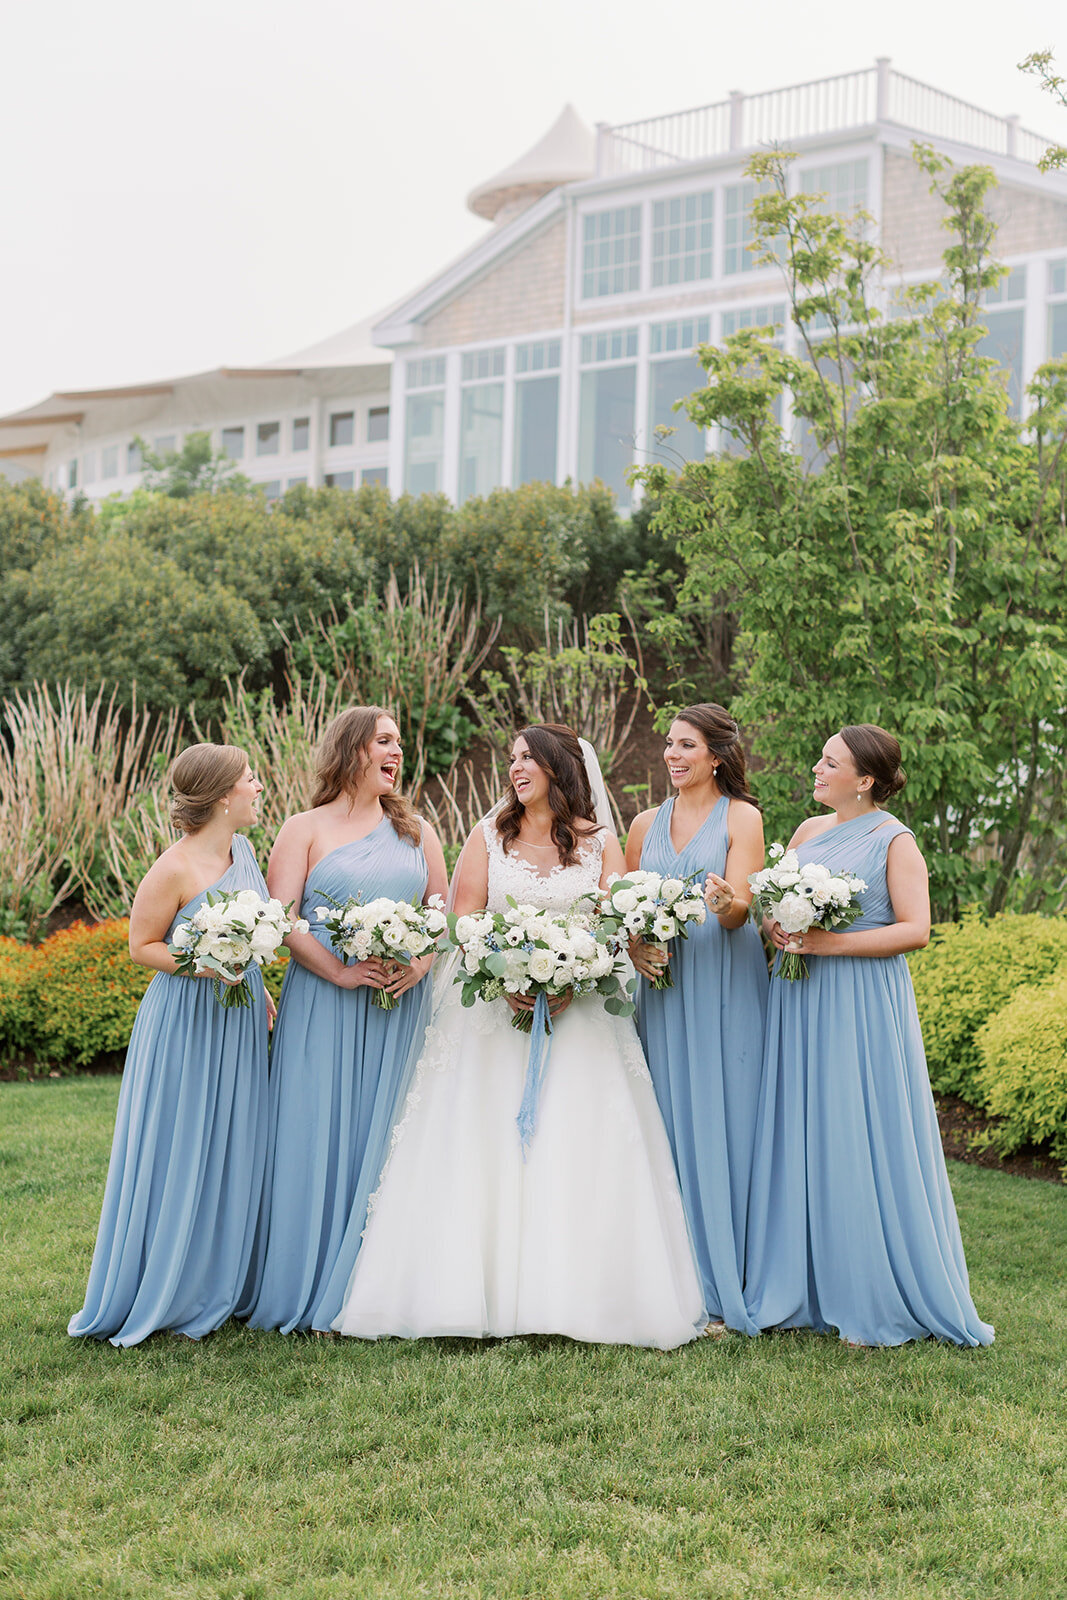 A bride and her bridesmaids smiling and holding bouquets of flowers.